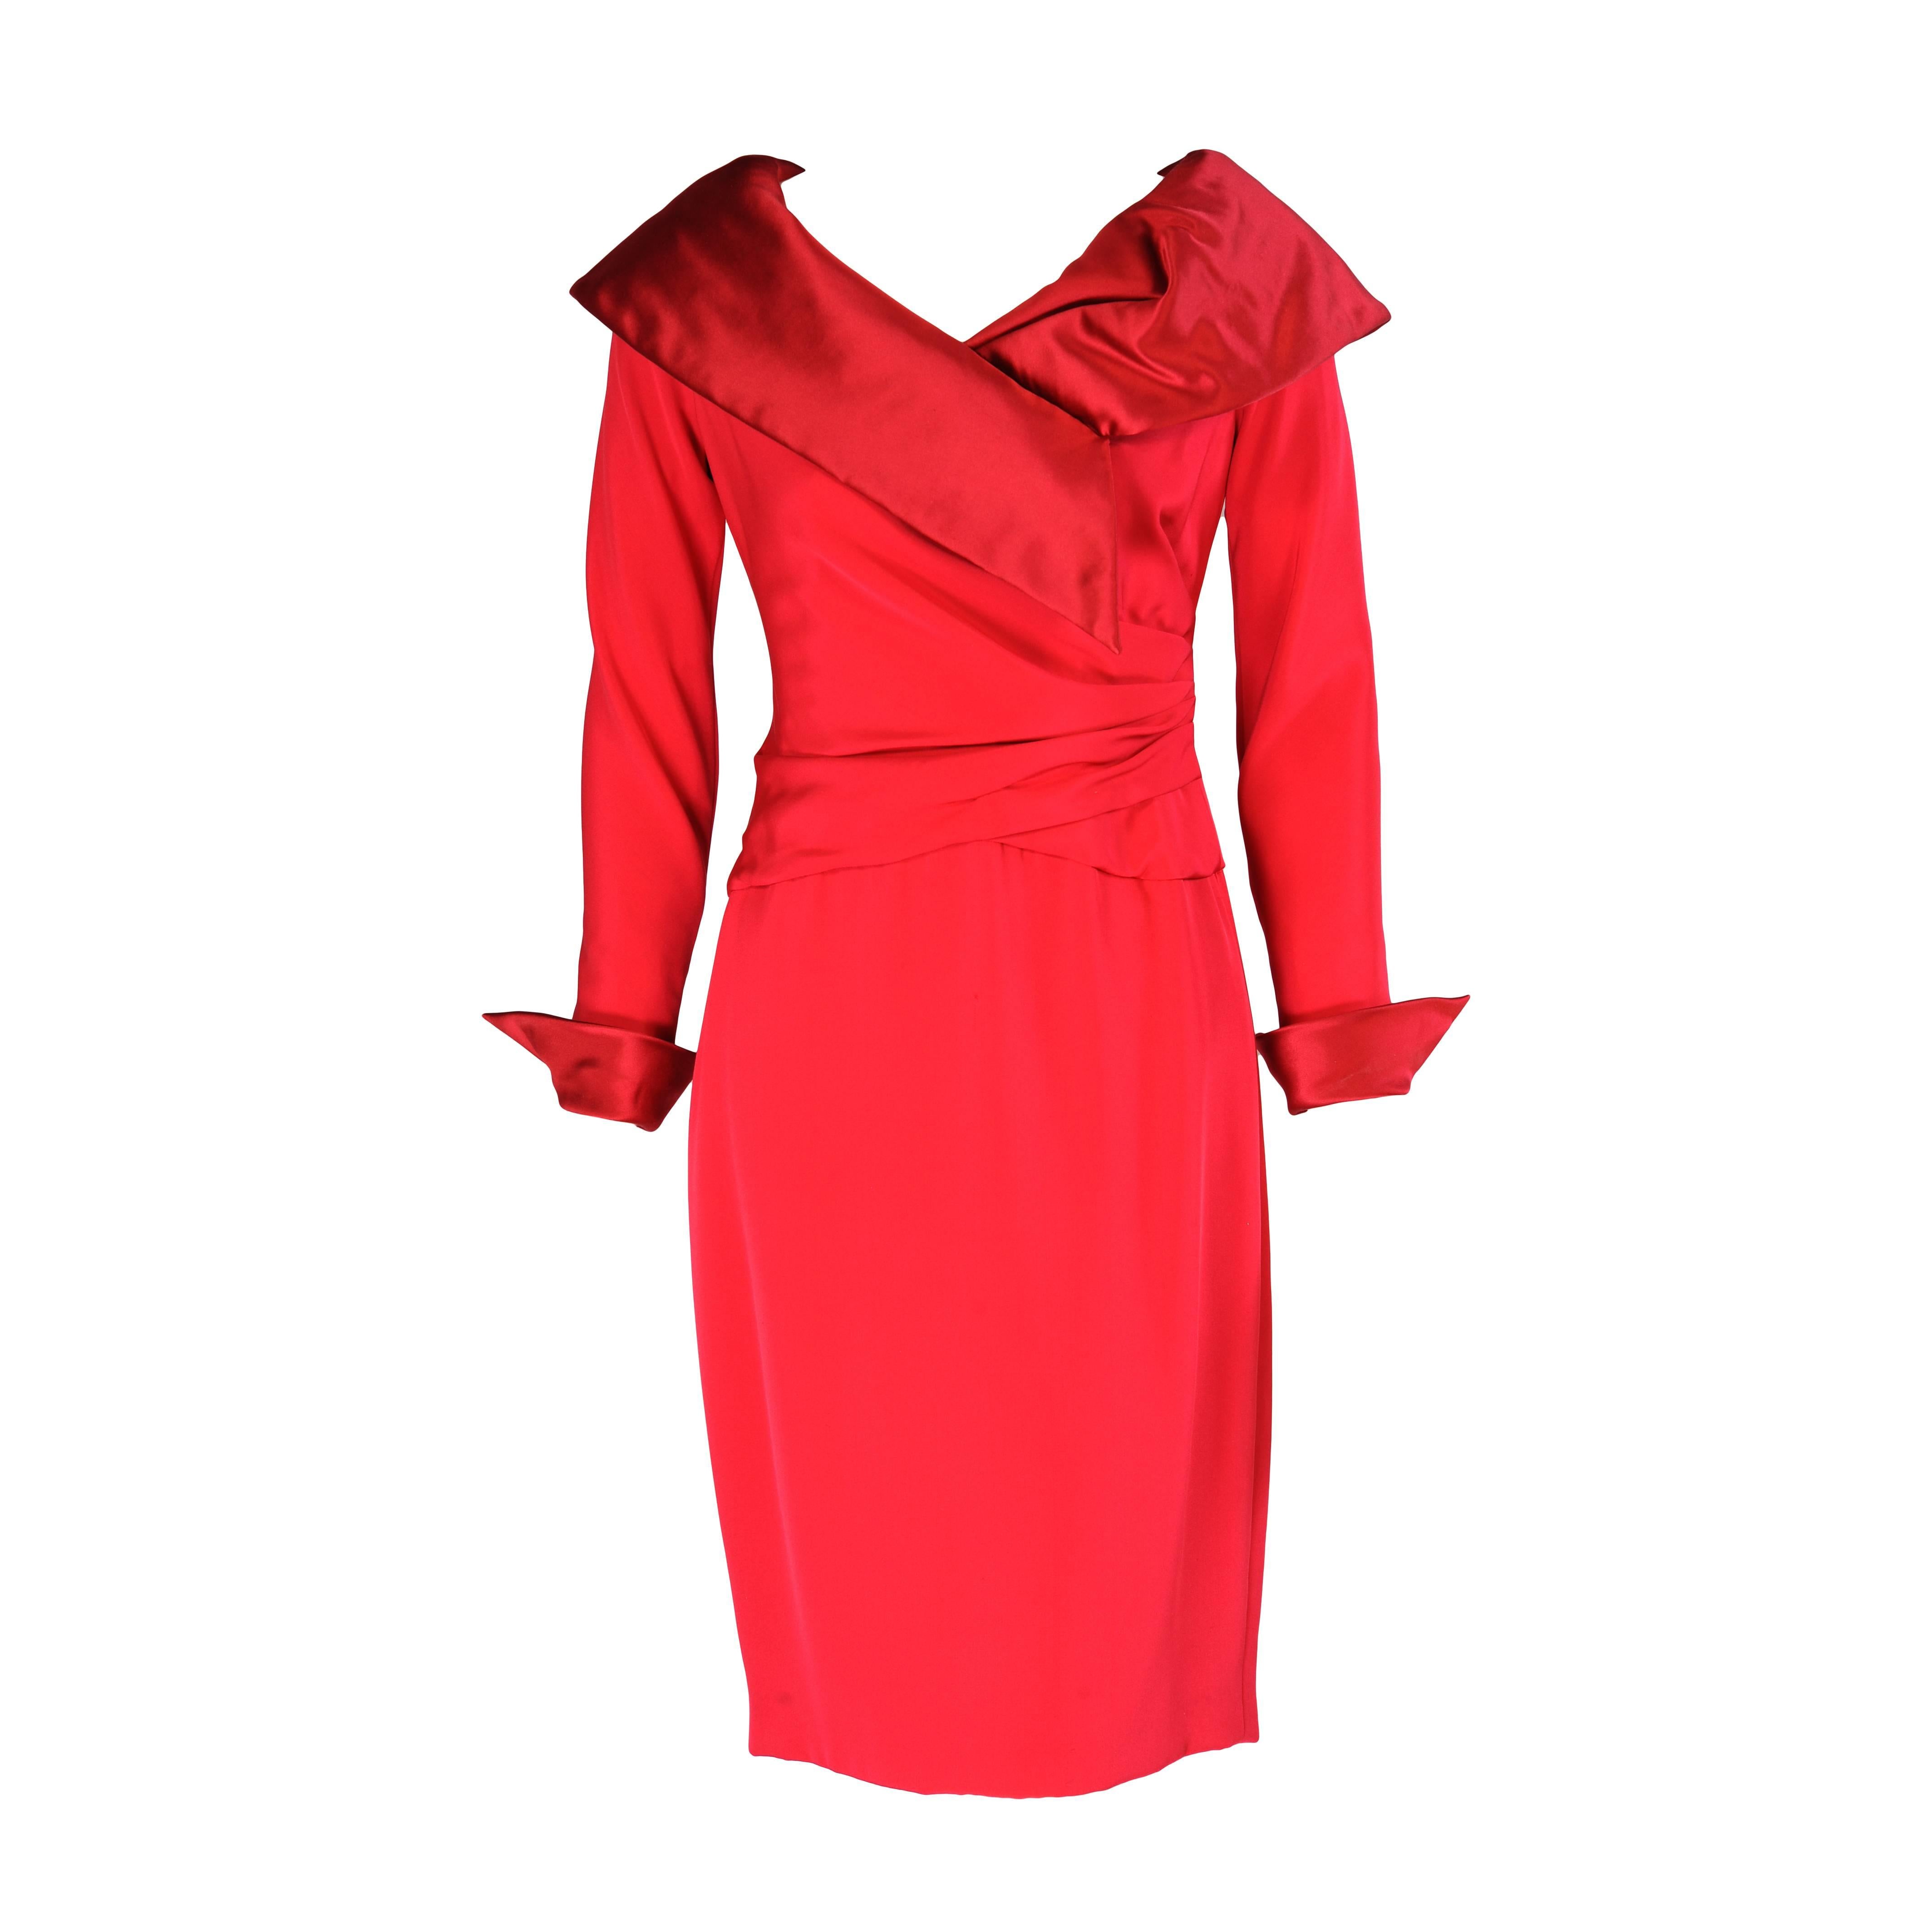 Christian Lacroix Numbered Haute Couture Red Satin & Silk Dress